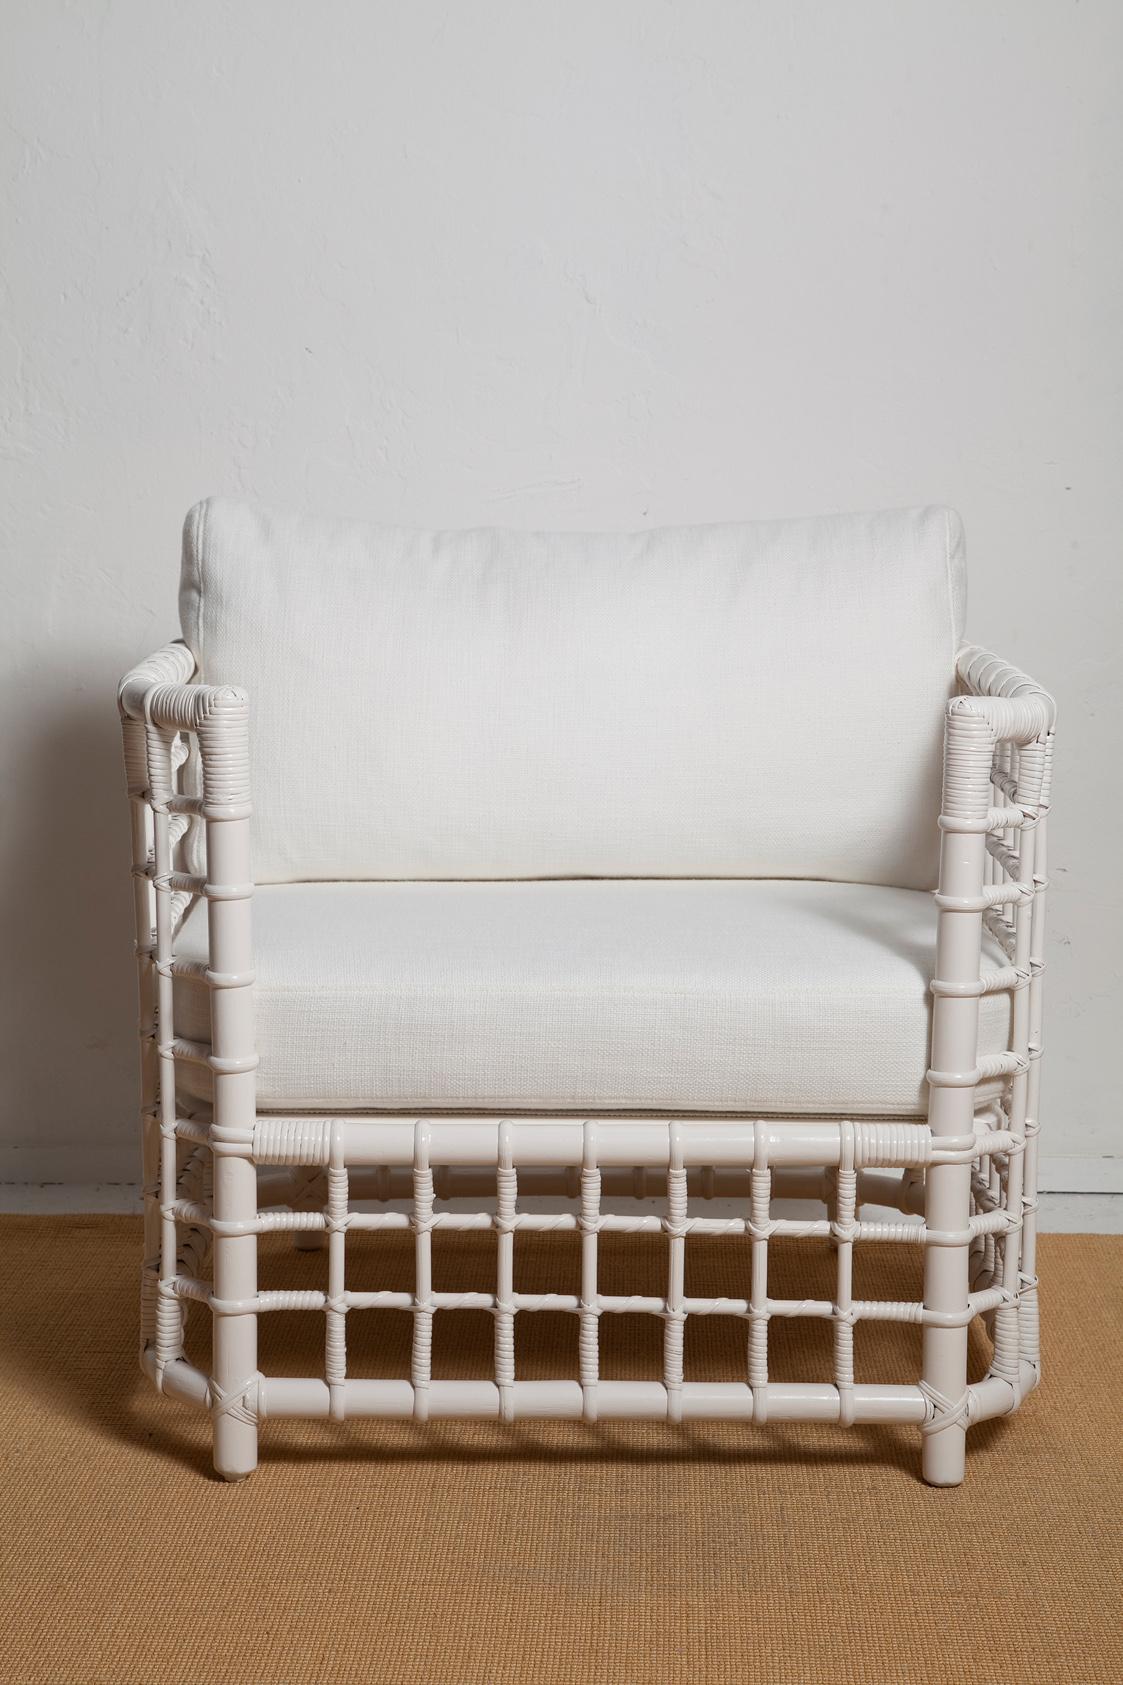 A fresh summery take on Le Corbusier's iconic LC2 chair, these 1970's woven bamboo chairs have been given a new coat of white paint, all new foam cushions (backs are down-wrapped for added comfort), and simple textured cotton blend upholstery.